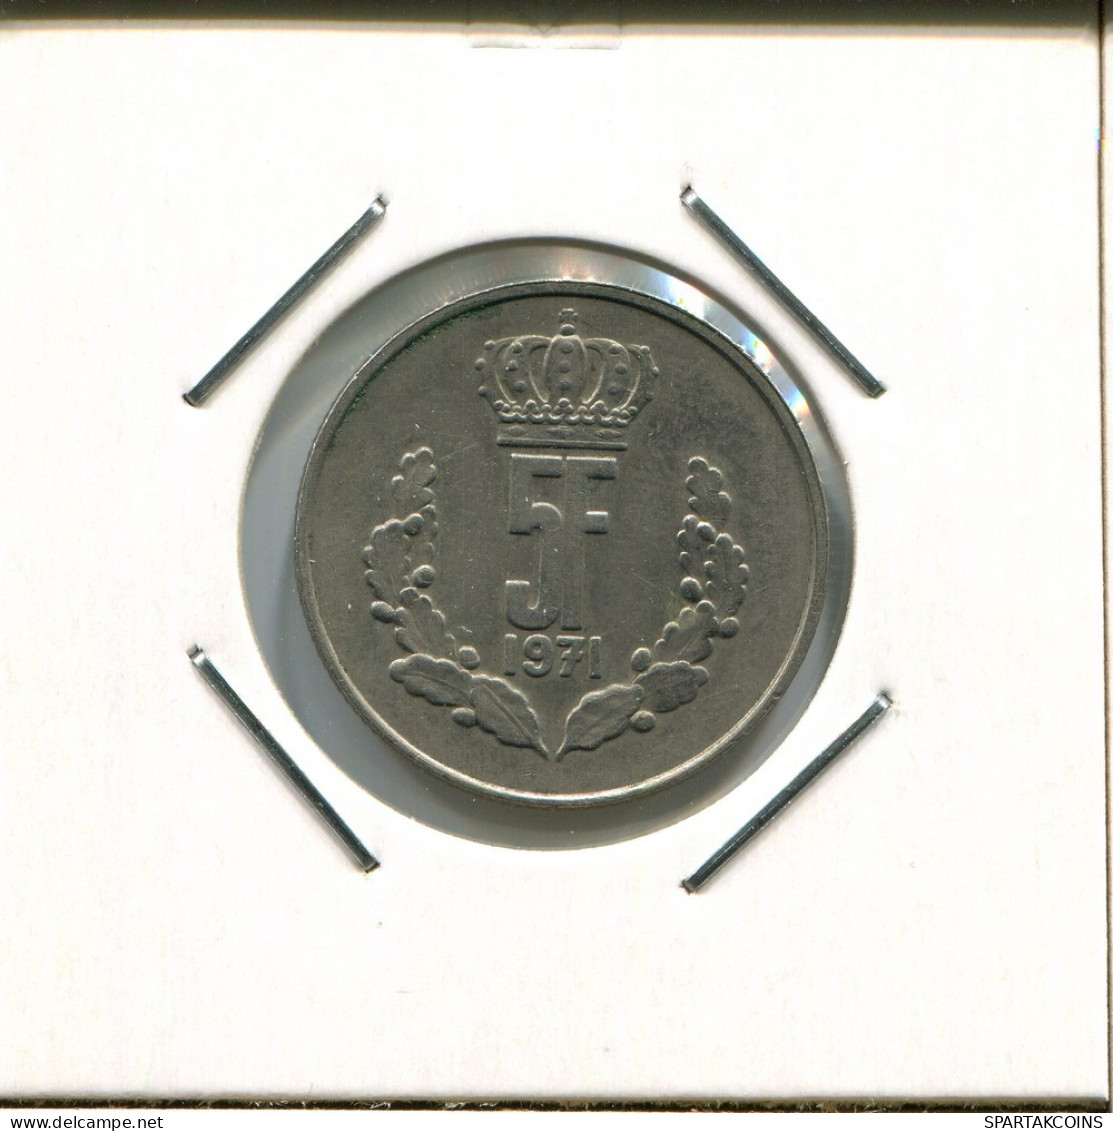 5 FRANCS 1971 LUXEMBURG LUXEMBOURG Münze #AR686.D.A - Luxembourg